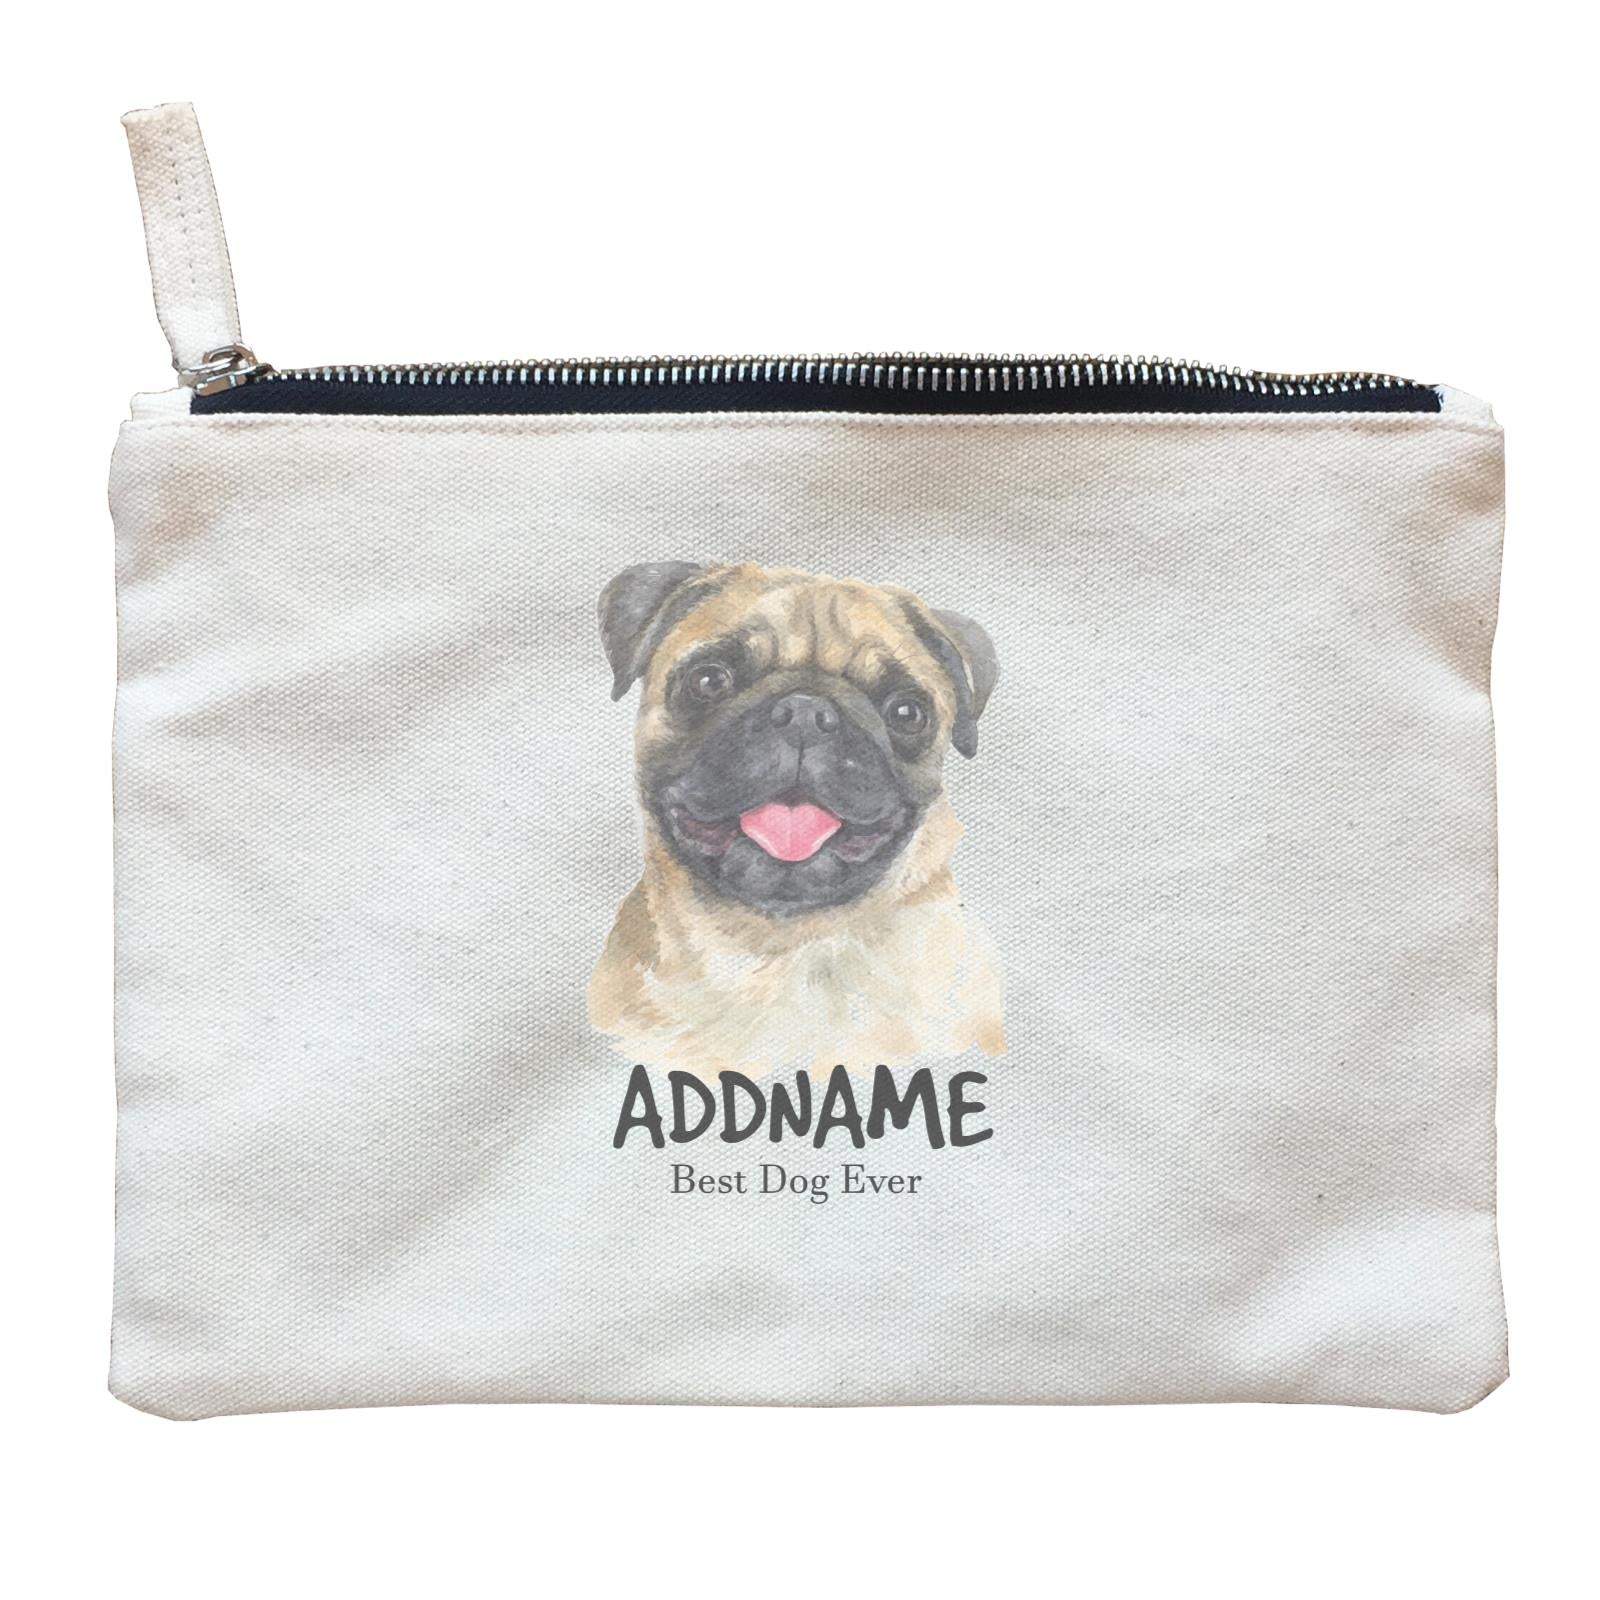 Watercolor Dog Pug Happy Best Dog Ever Addname Zipper Pouch